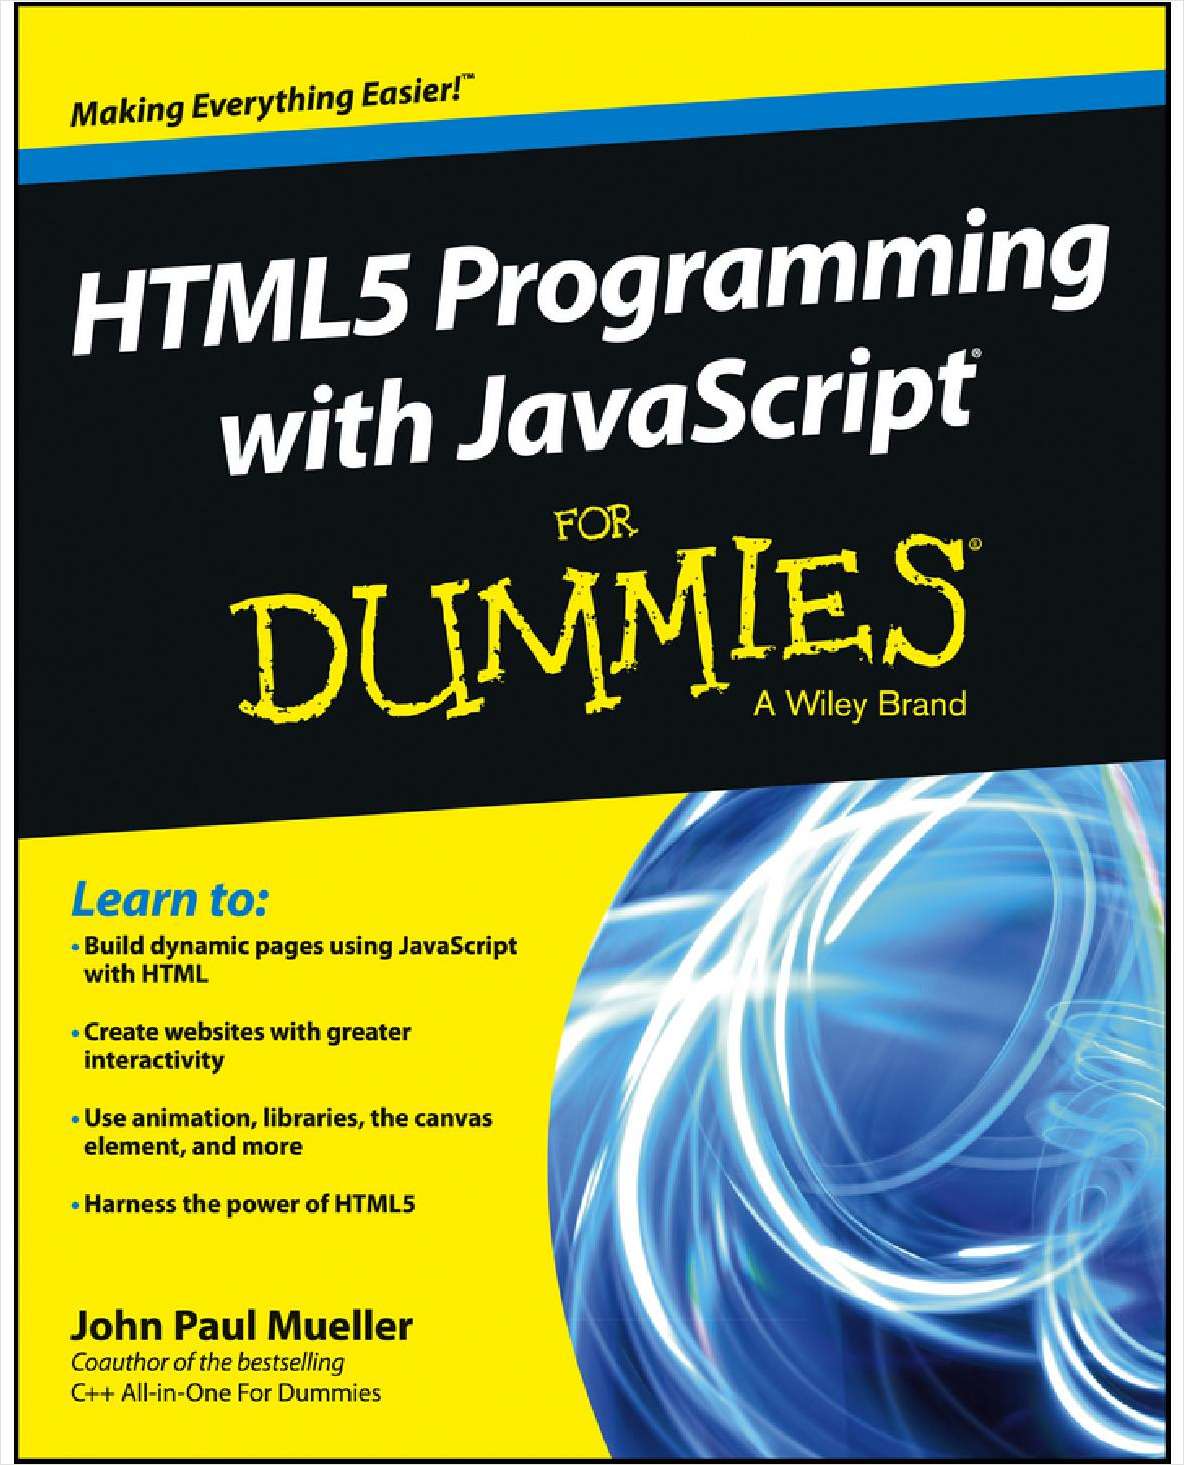 HTML5 Programming with JavaScript For Dummies--Free Sample Chapter